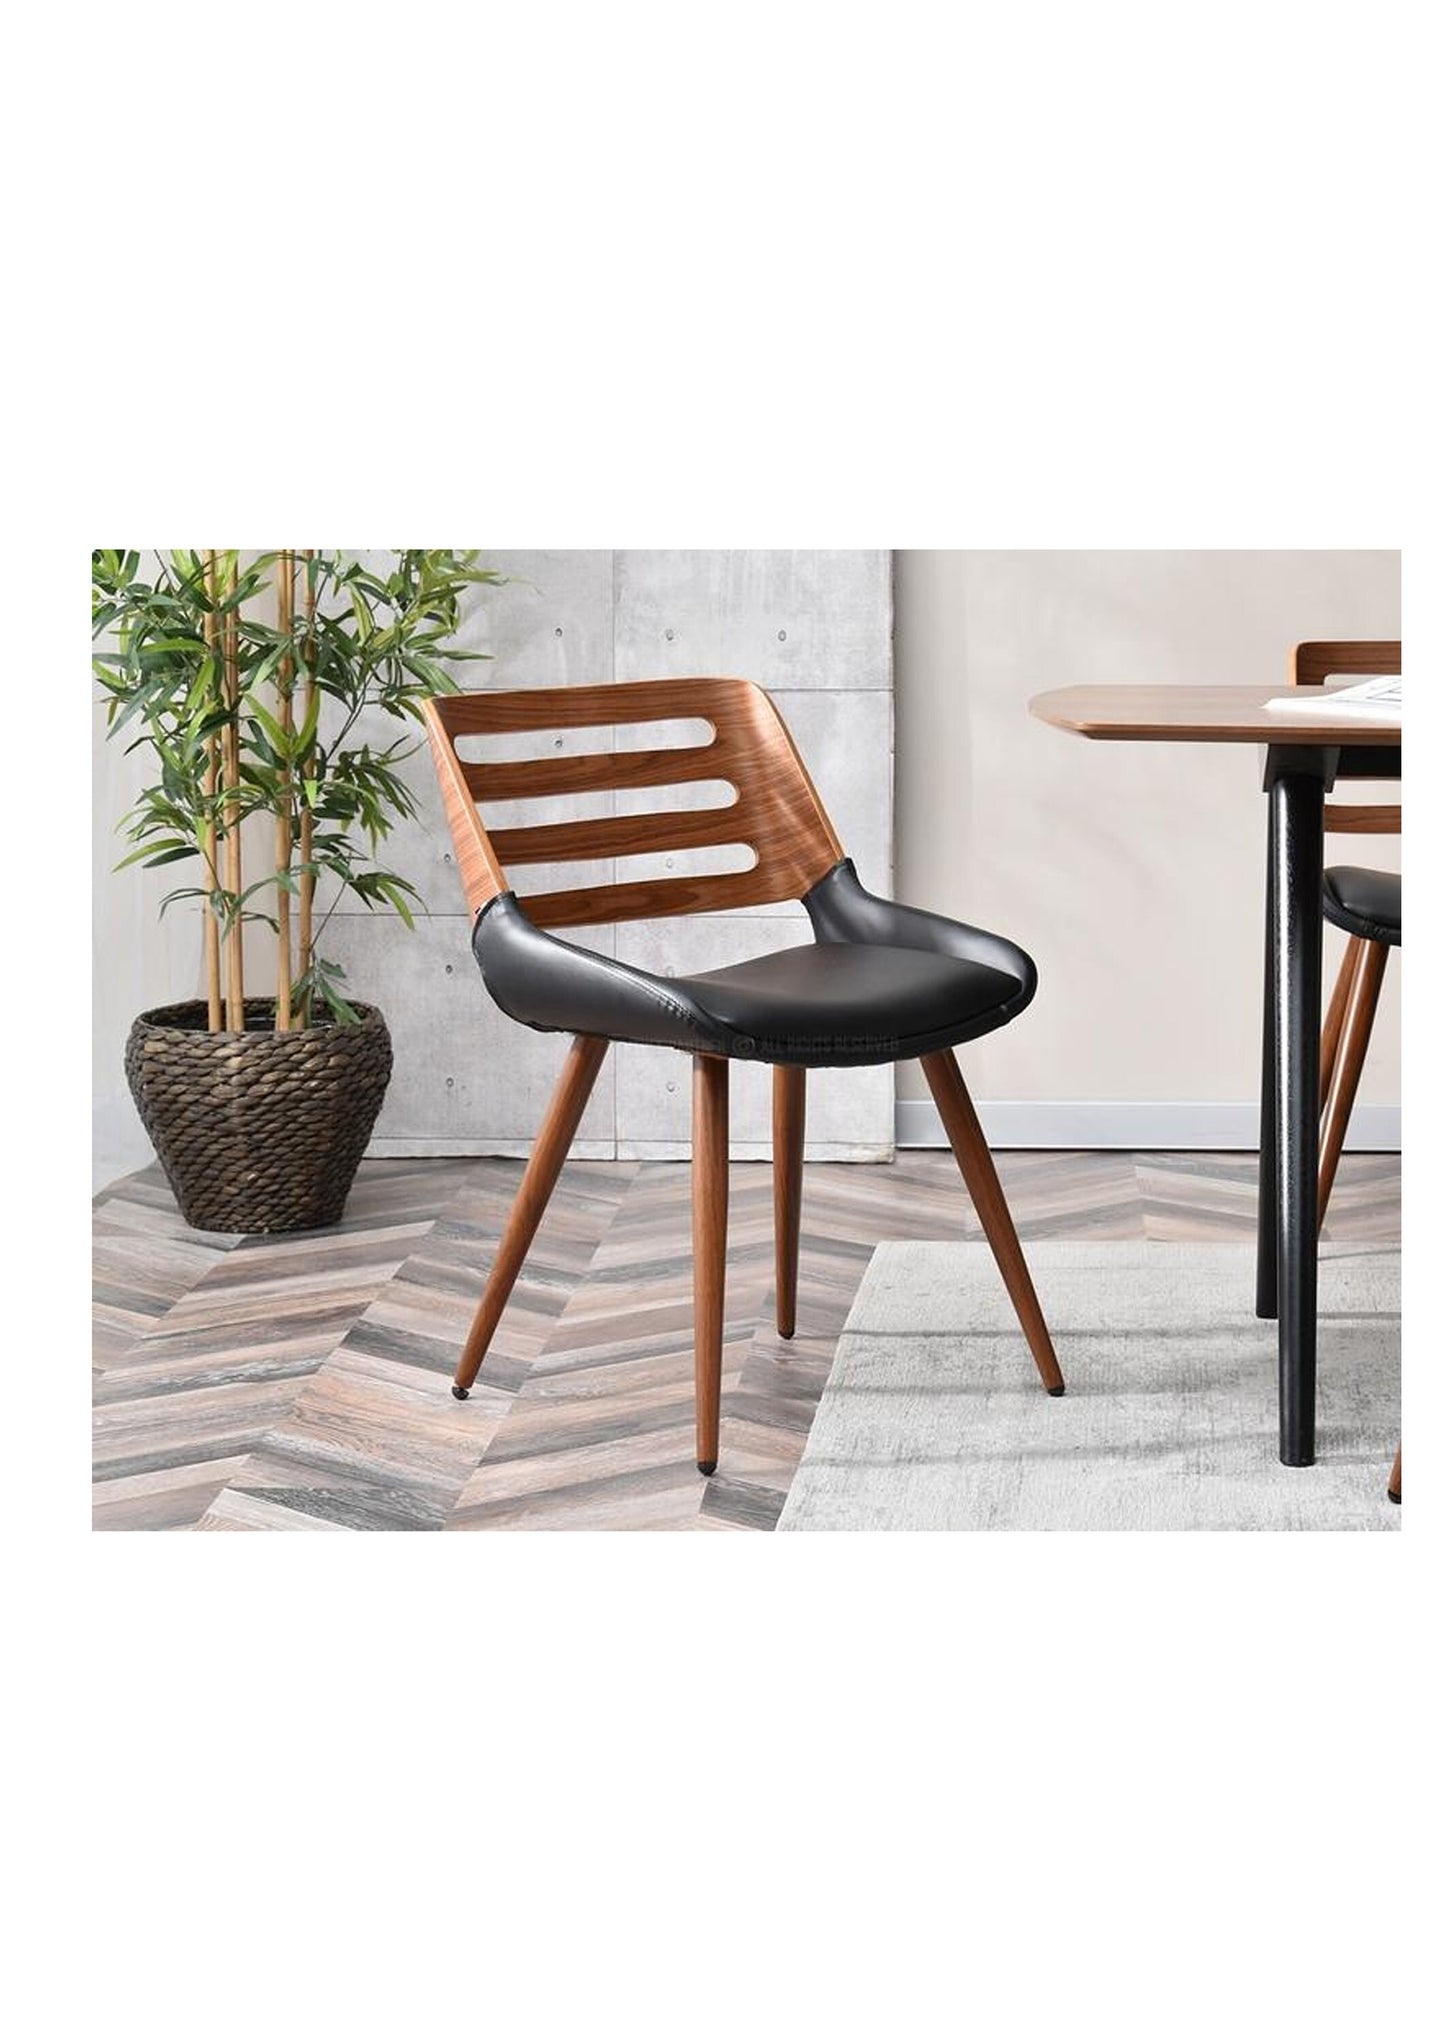 Designer chair Retro Chair Scandi Office Desk or Dining Chair in Faux Leather and Walnut Pre Order for mid February